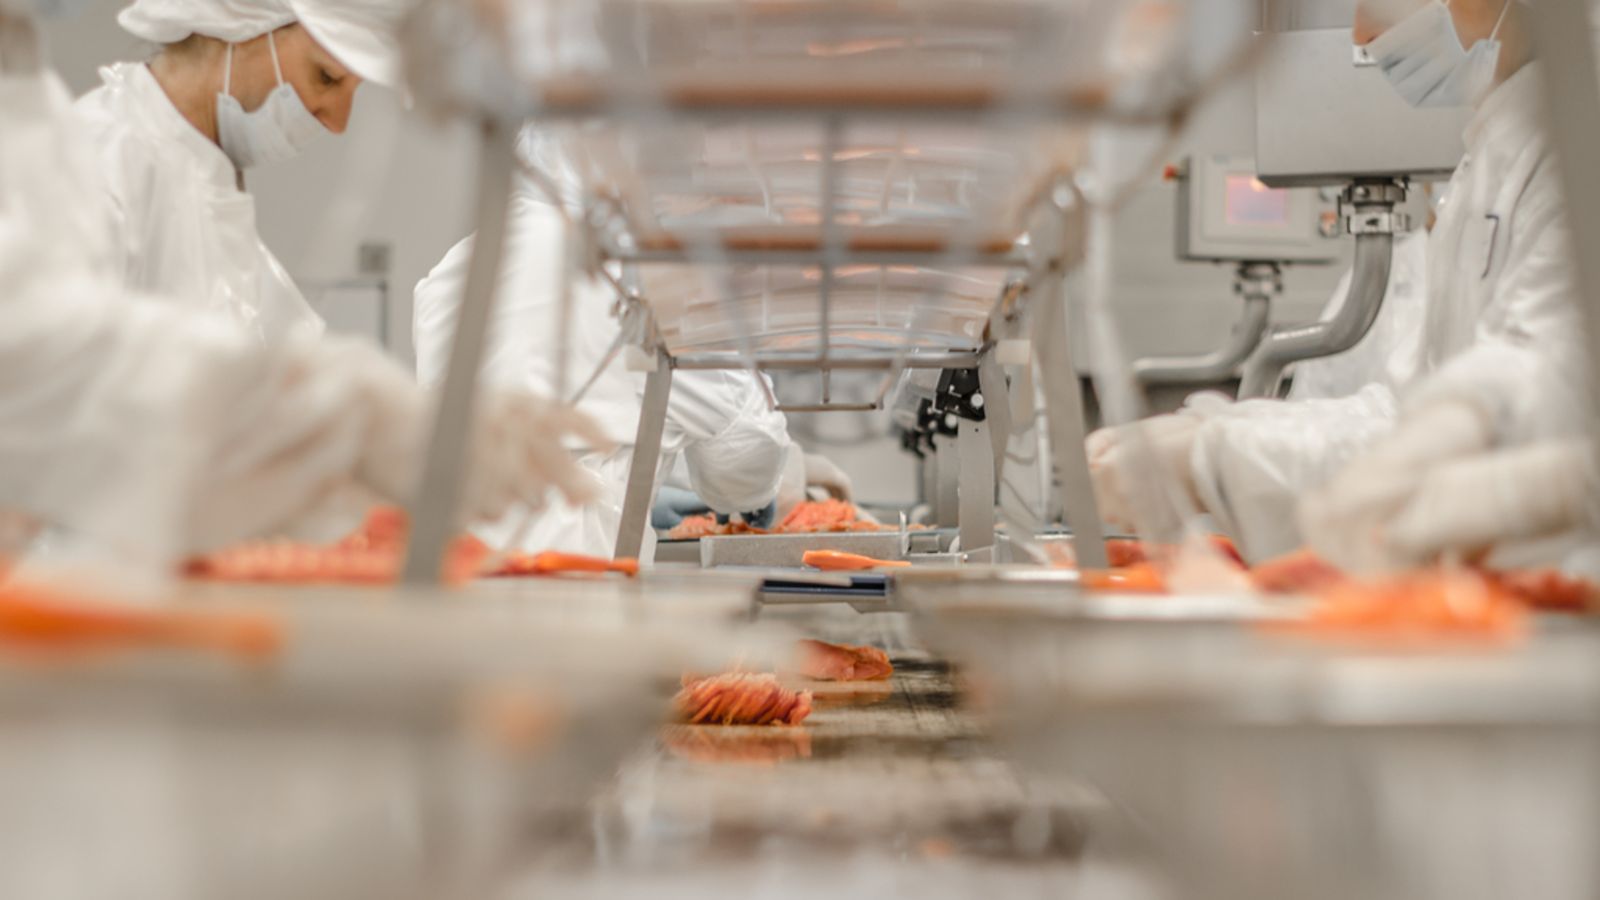 People in clean-room gear process salmon in a stainless steel production facility